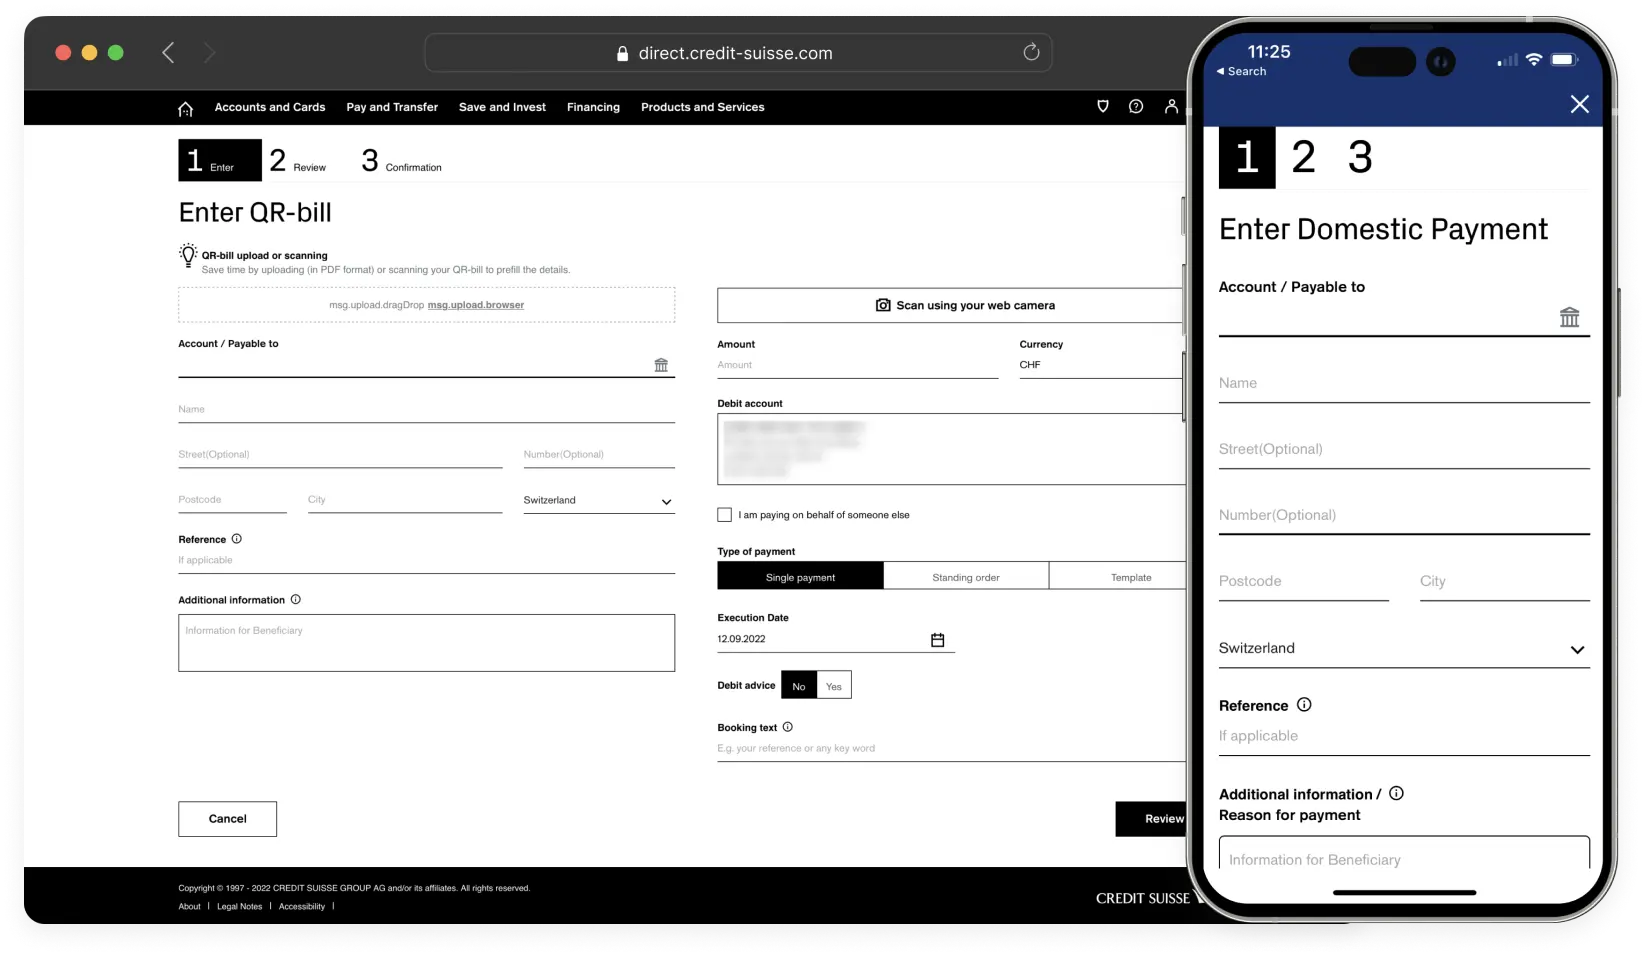 Redesign of the payment entry for private and business clients